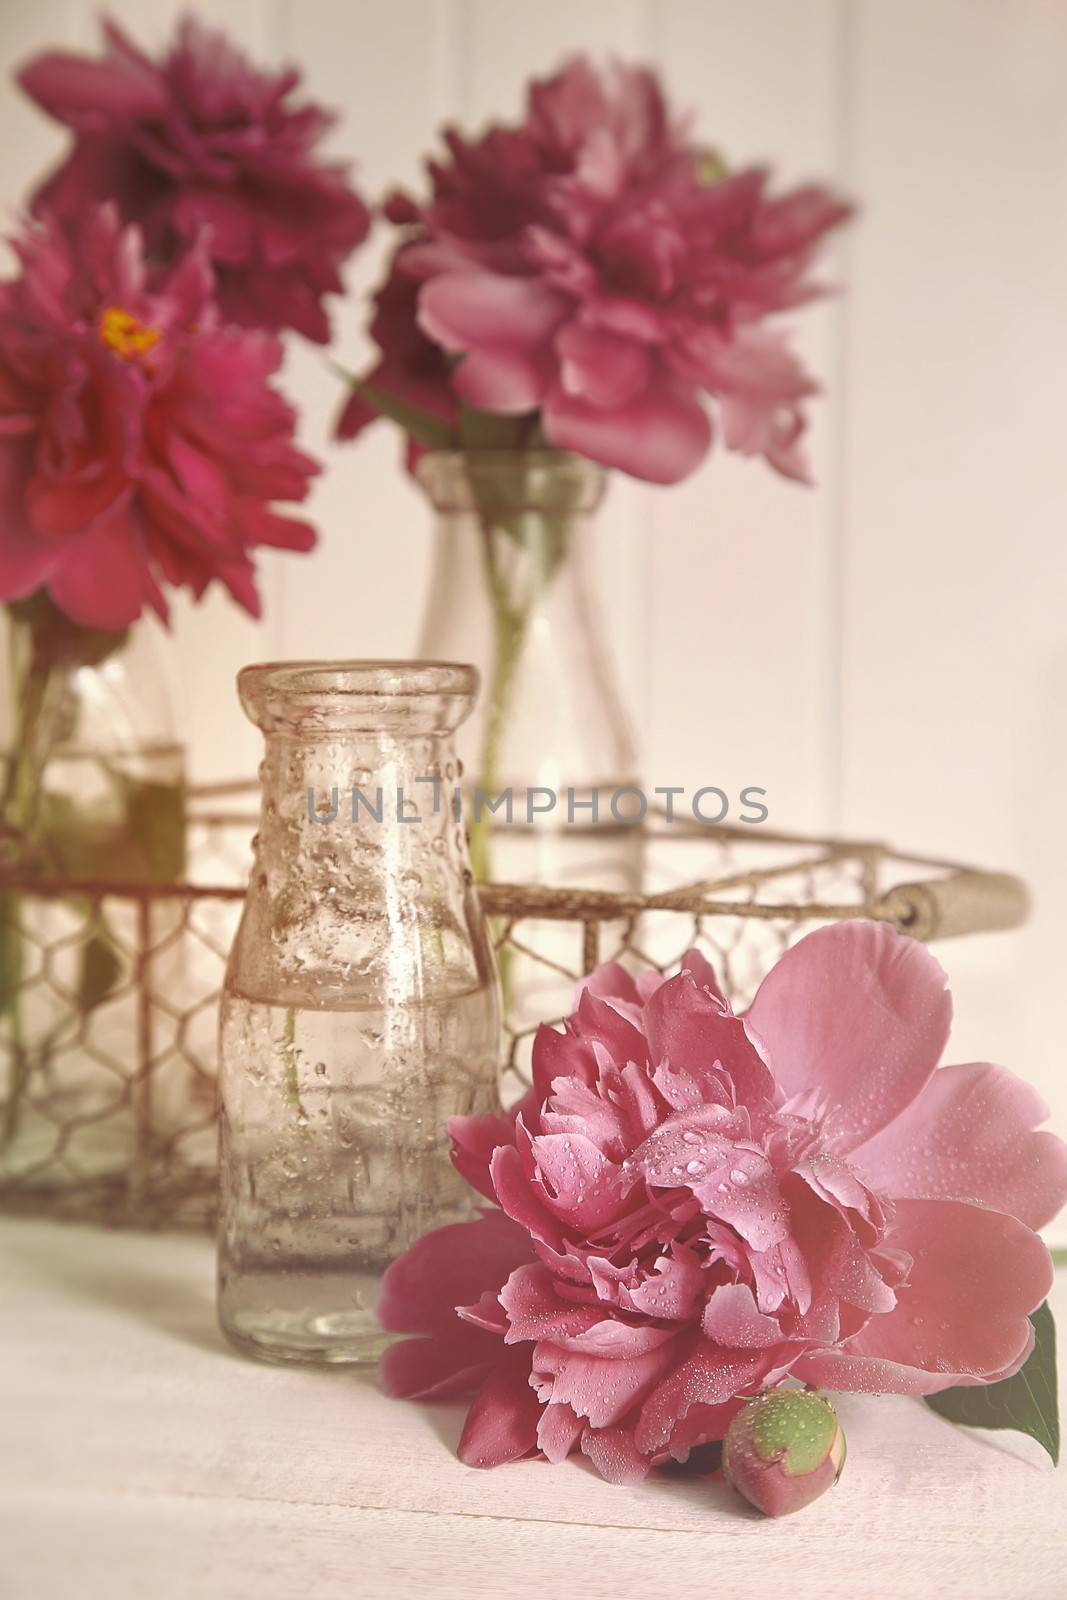 Beautiful peony flowers with bottles on table by Sandralise